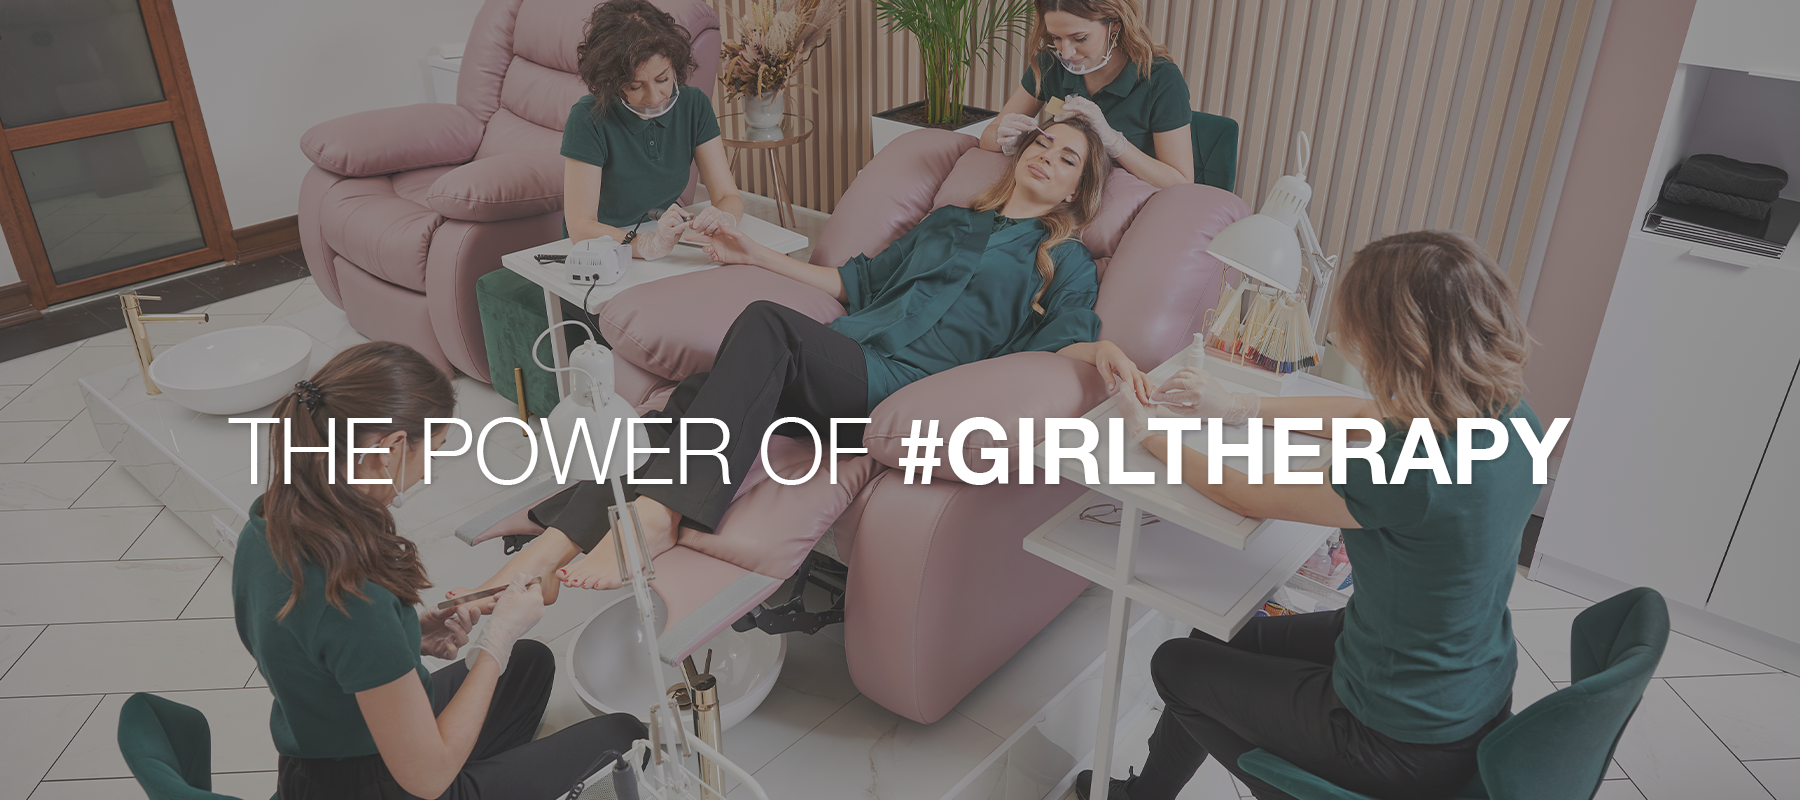 #GirlTherapy: The Transformative Power of Nail Salon Pampering